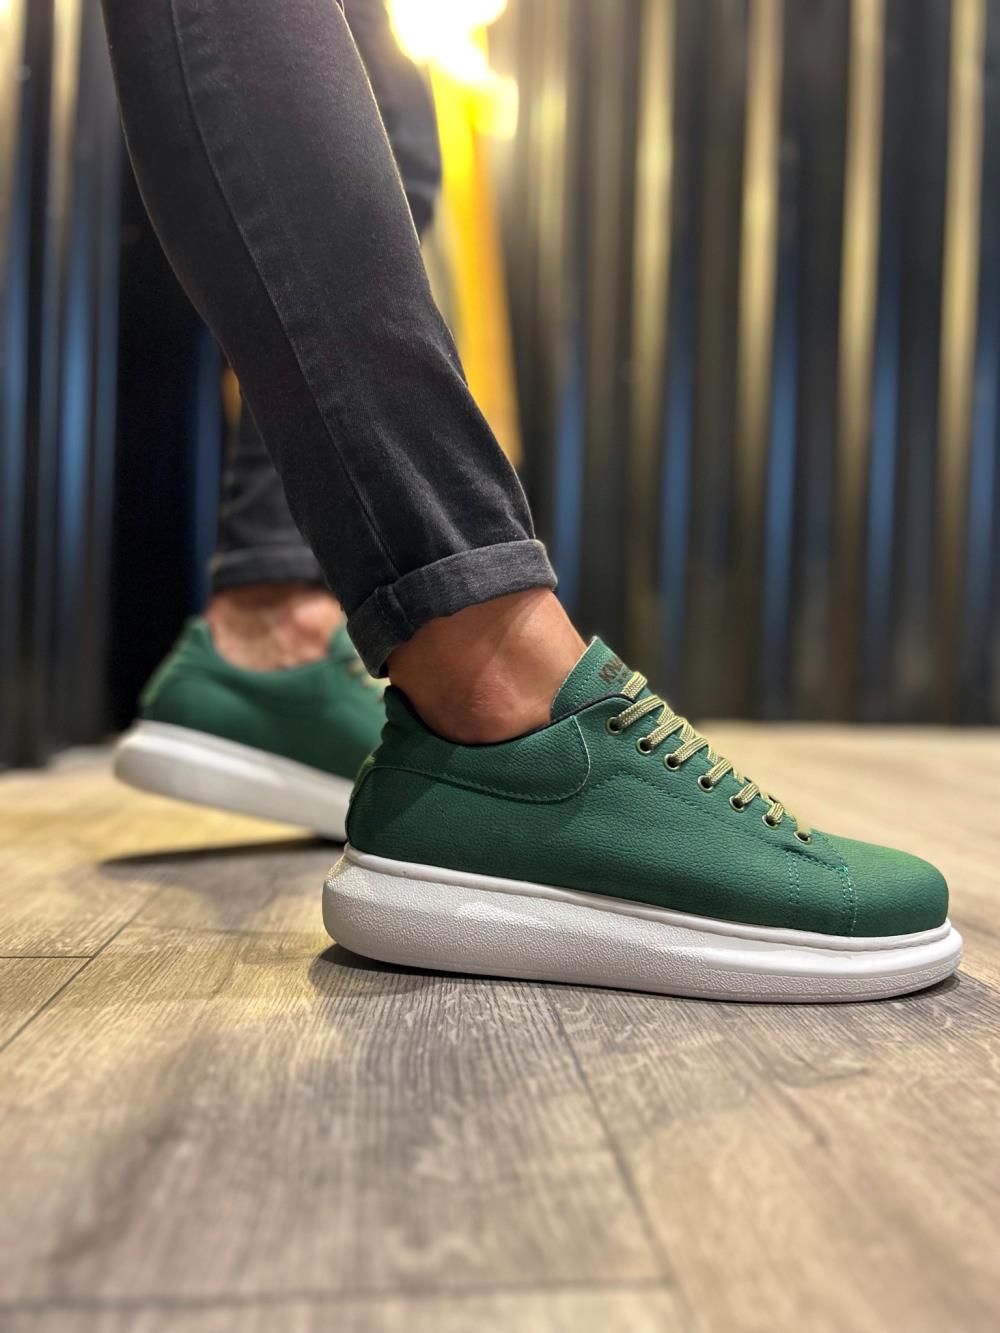 Men's High Sole Sneakers Casual Shoes 045 Green (White Sole) - STREETMODE™